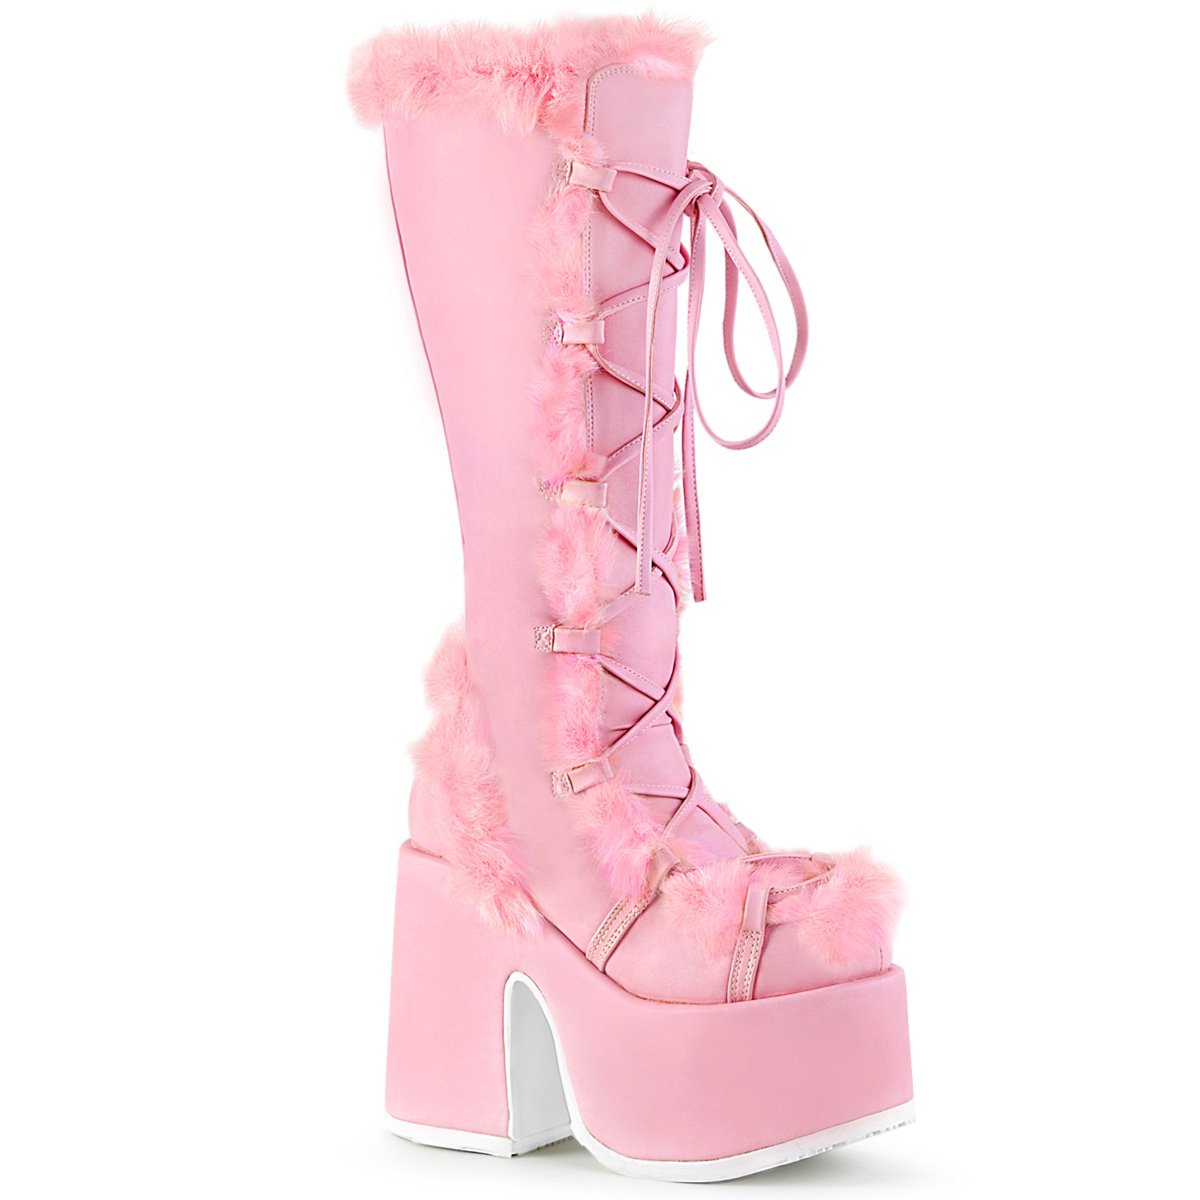 DEMONIA "Camel-311" Knee-high Boots - Pink Leather Demonia Cult